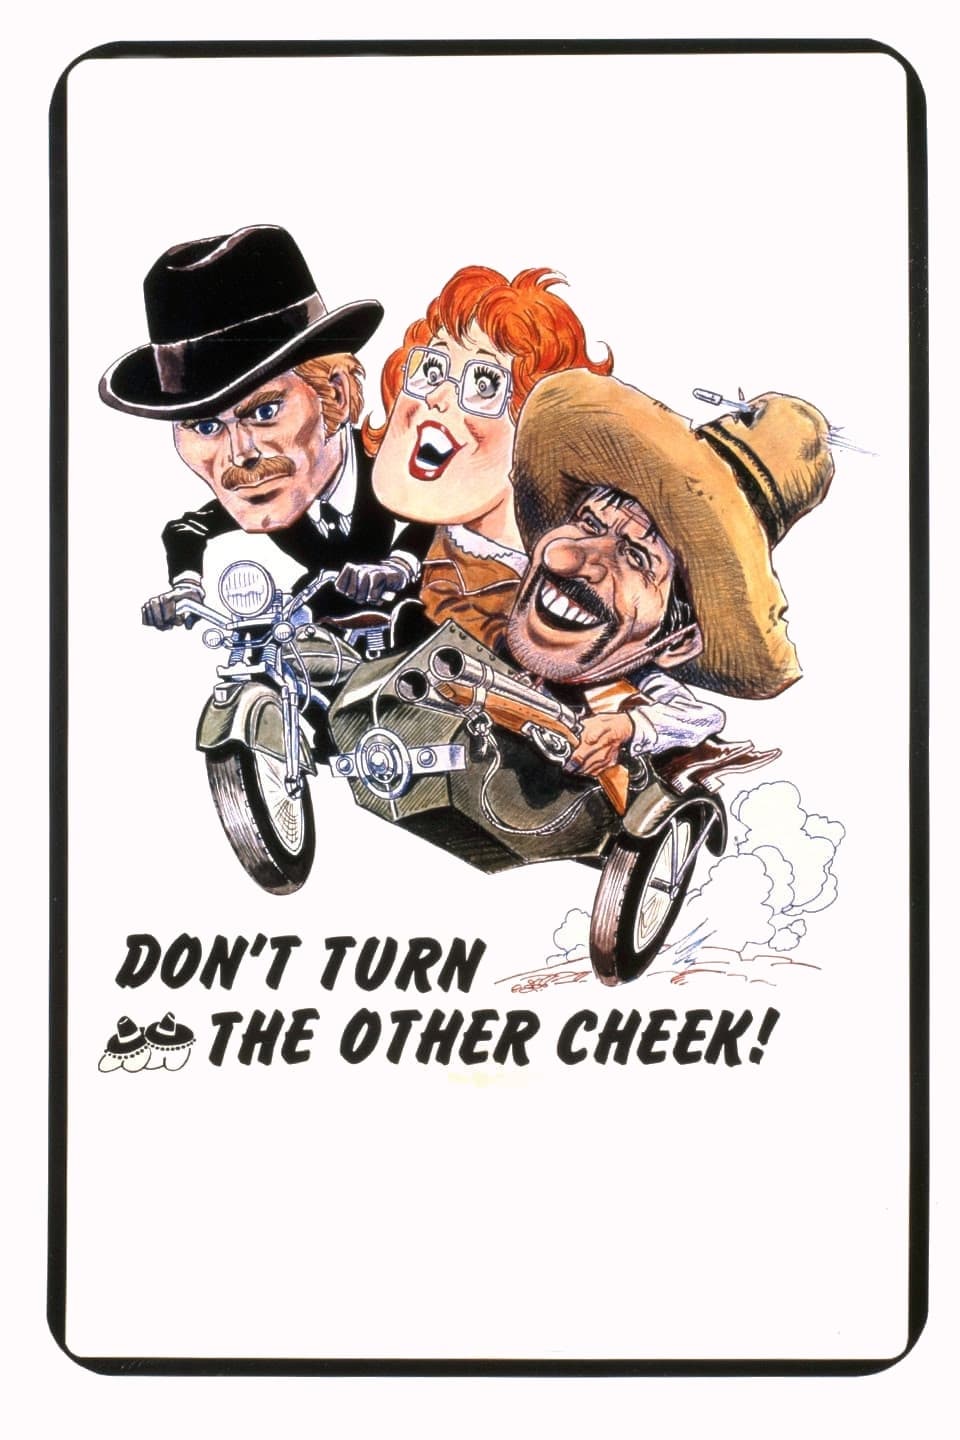 Don't Turn the Other Cheek (1971)